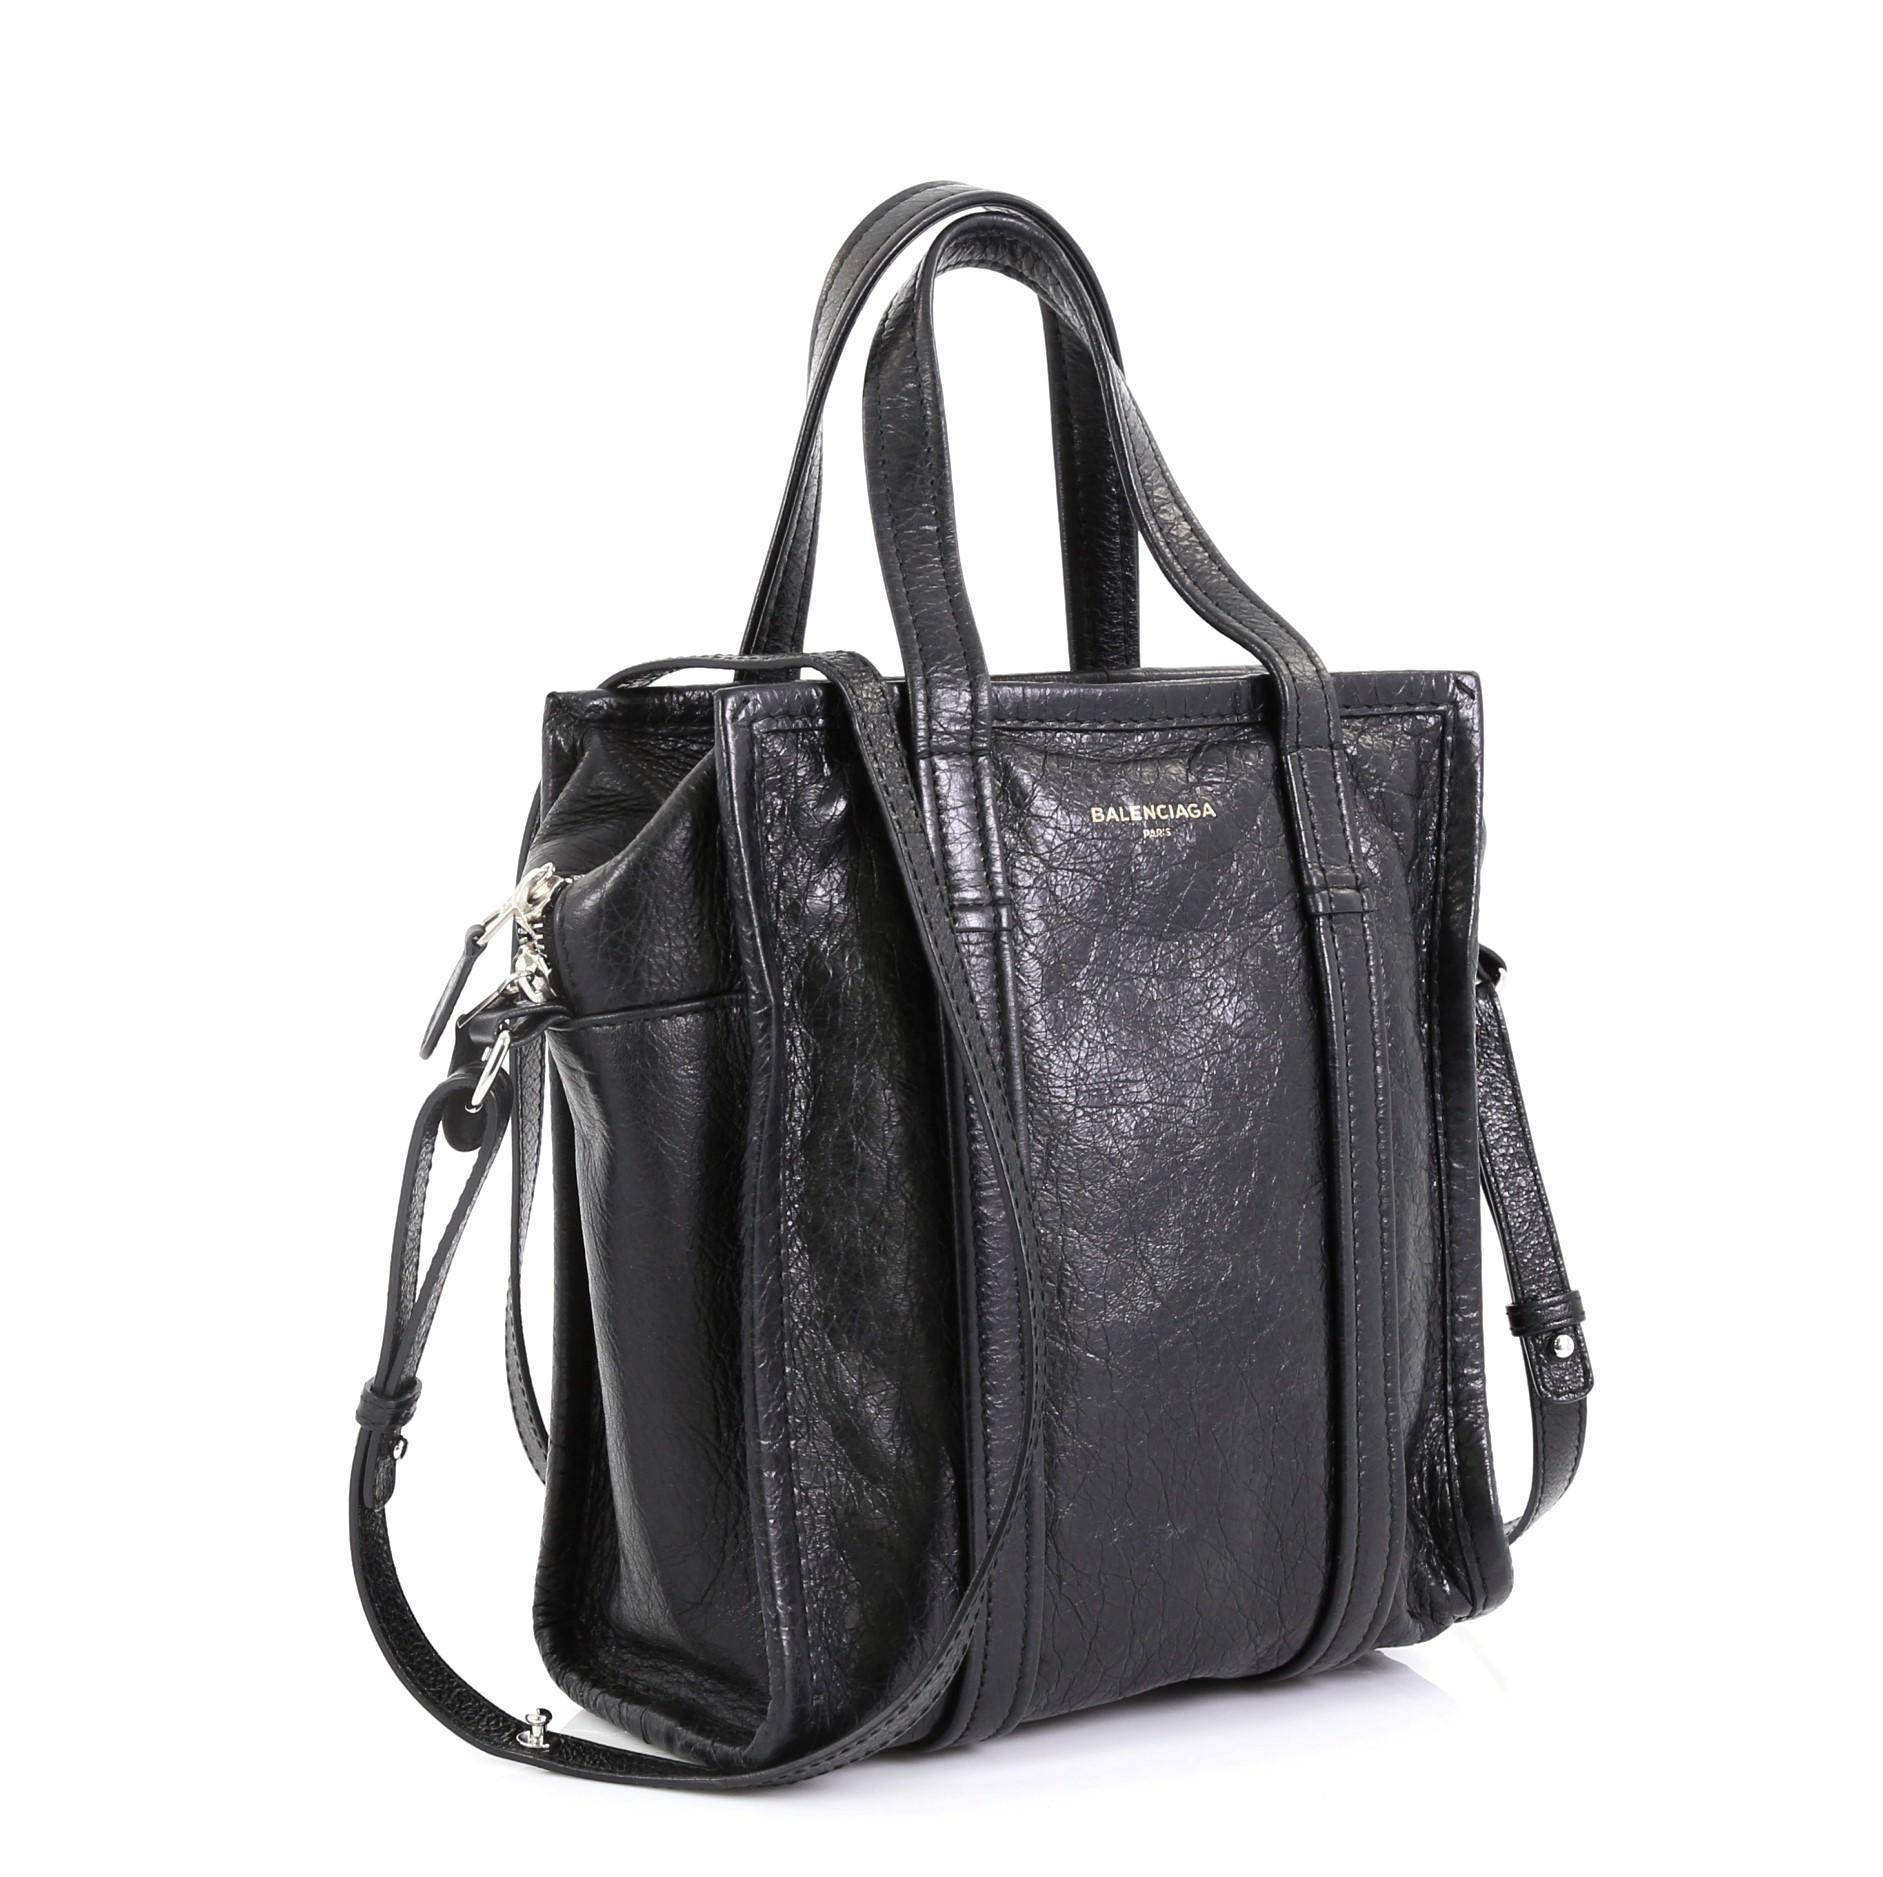 This Balenciaga Bazar Convertible Tote Leather XS, crafted in black leather, this bag features dual top leather handles, and silver-tone hardware accents. Its zip closure opens to a black fabric-lined interior with zip pocket 

Estimated Retail